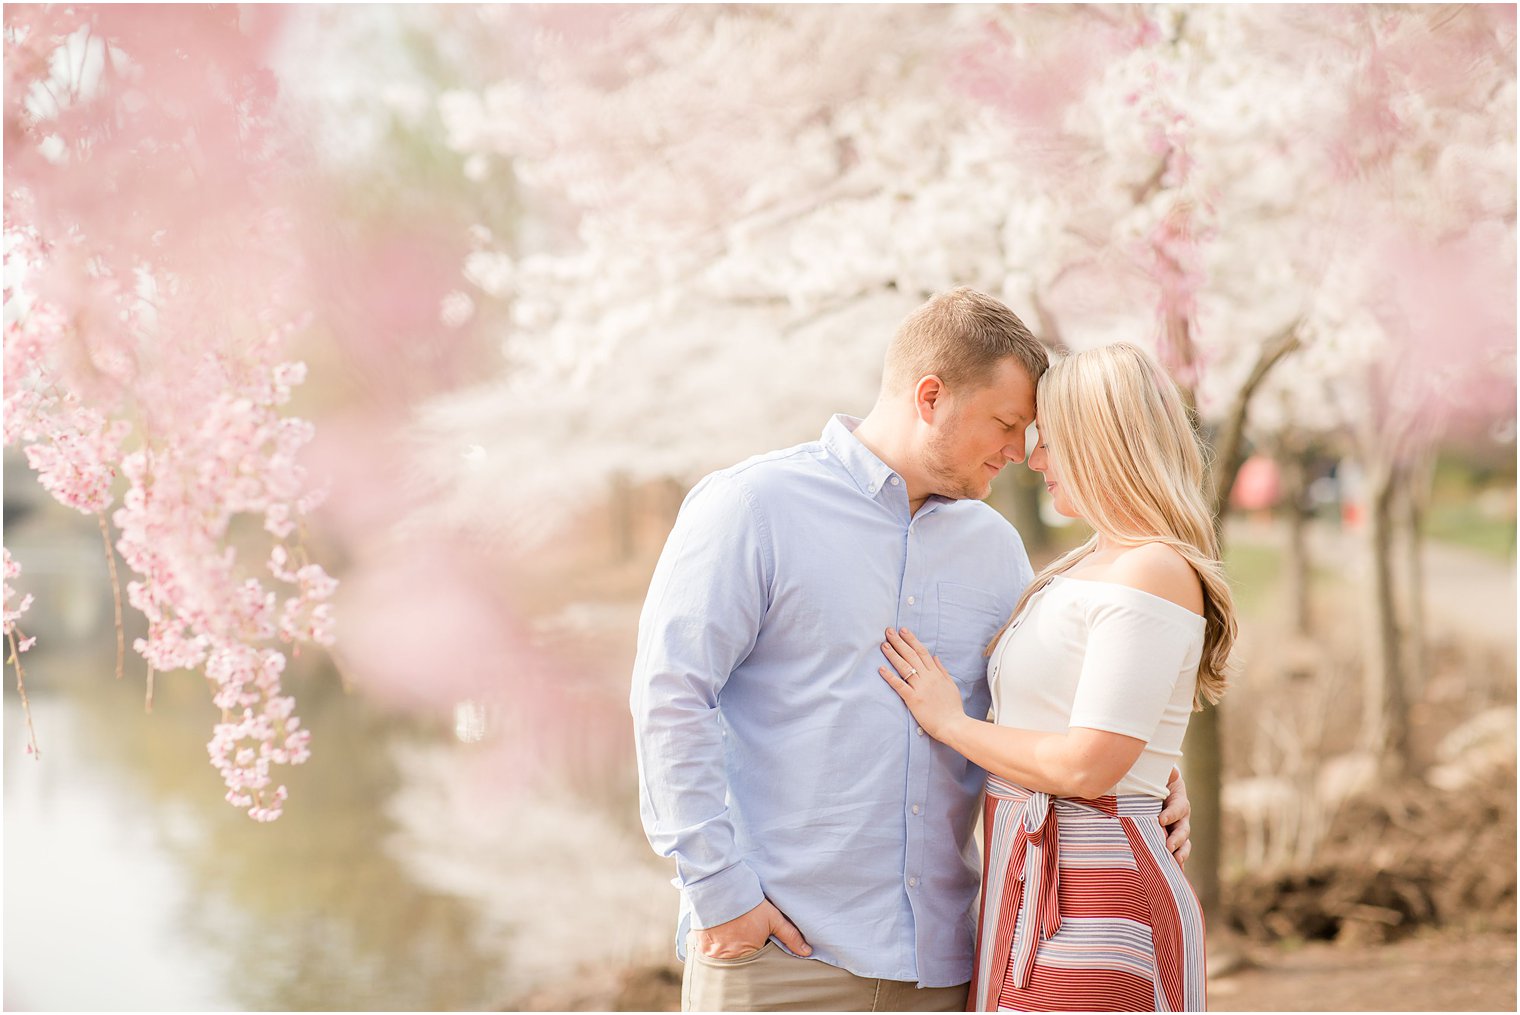 engaged couple poses under cherry blossom trees in the spring